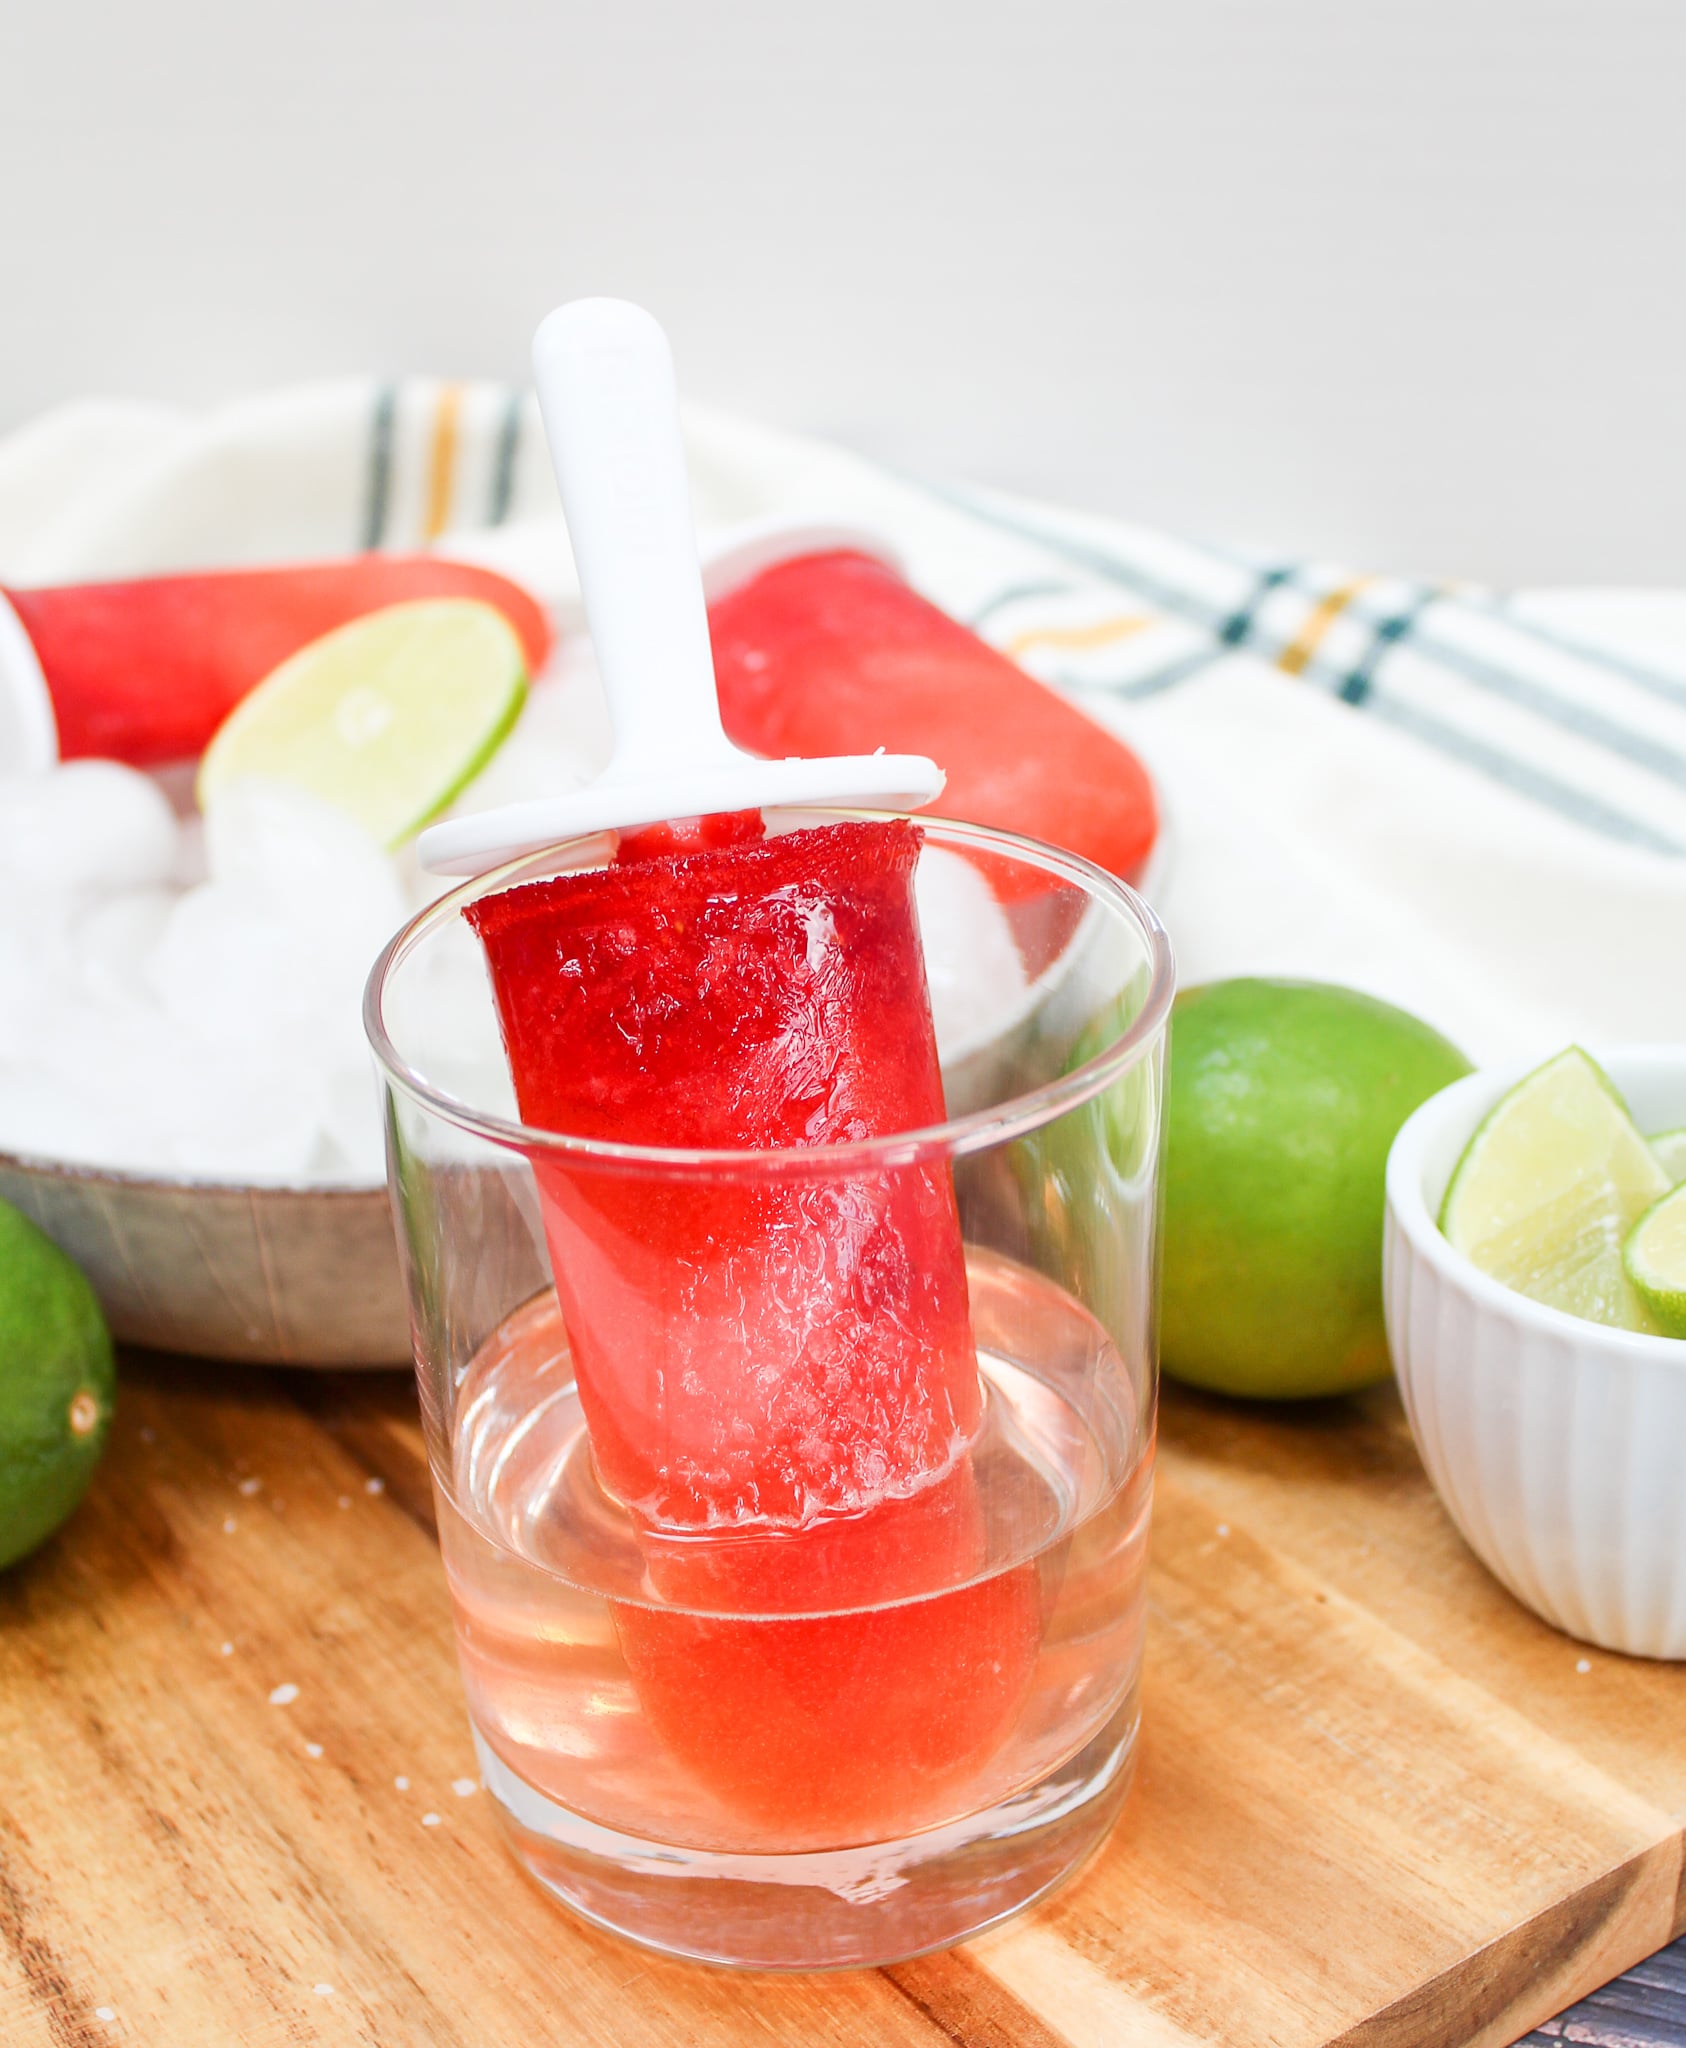 Popsicle upside down in a small glass to tequila and sprinkled with course salt